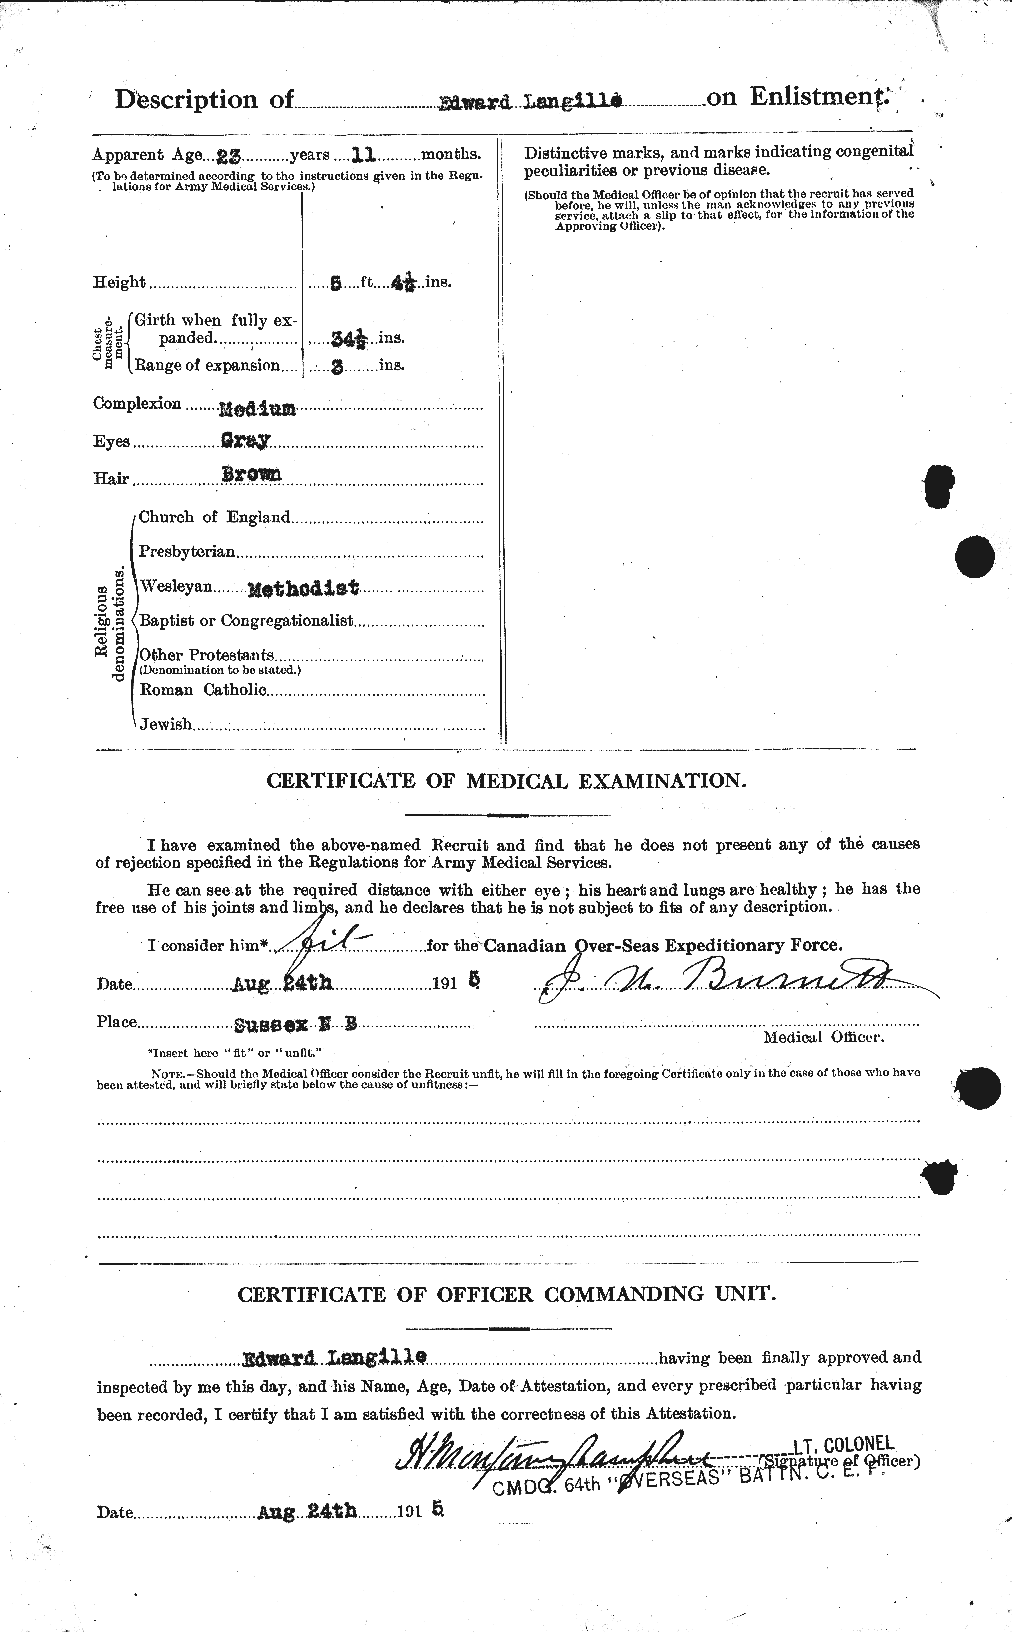 Personnel Records of the First World War - CEF 447782b